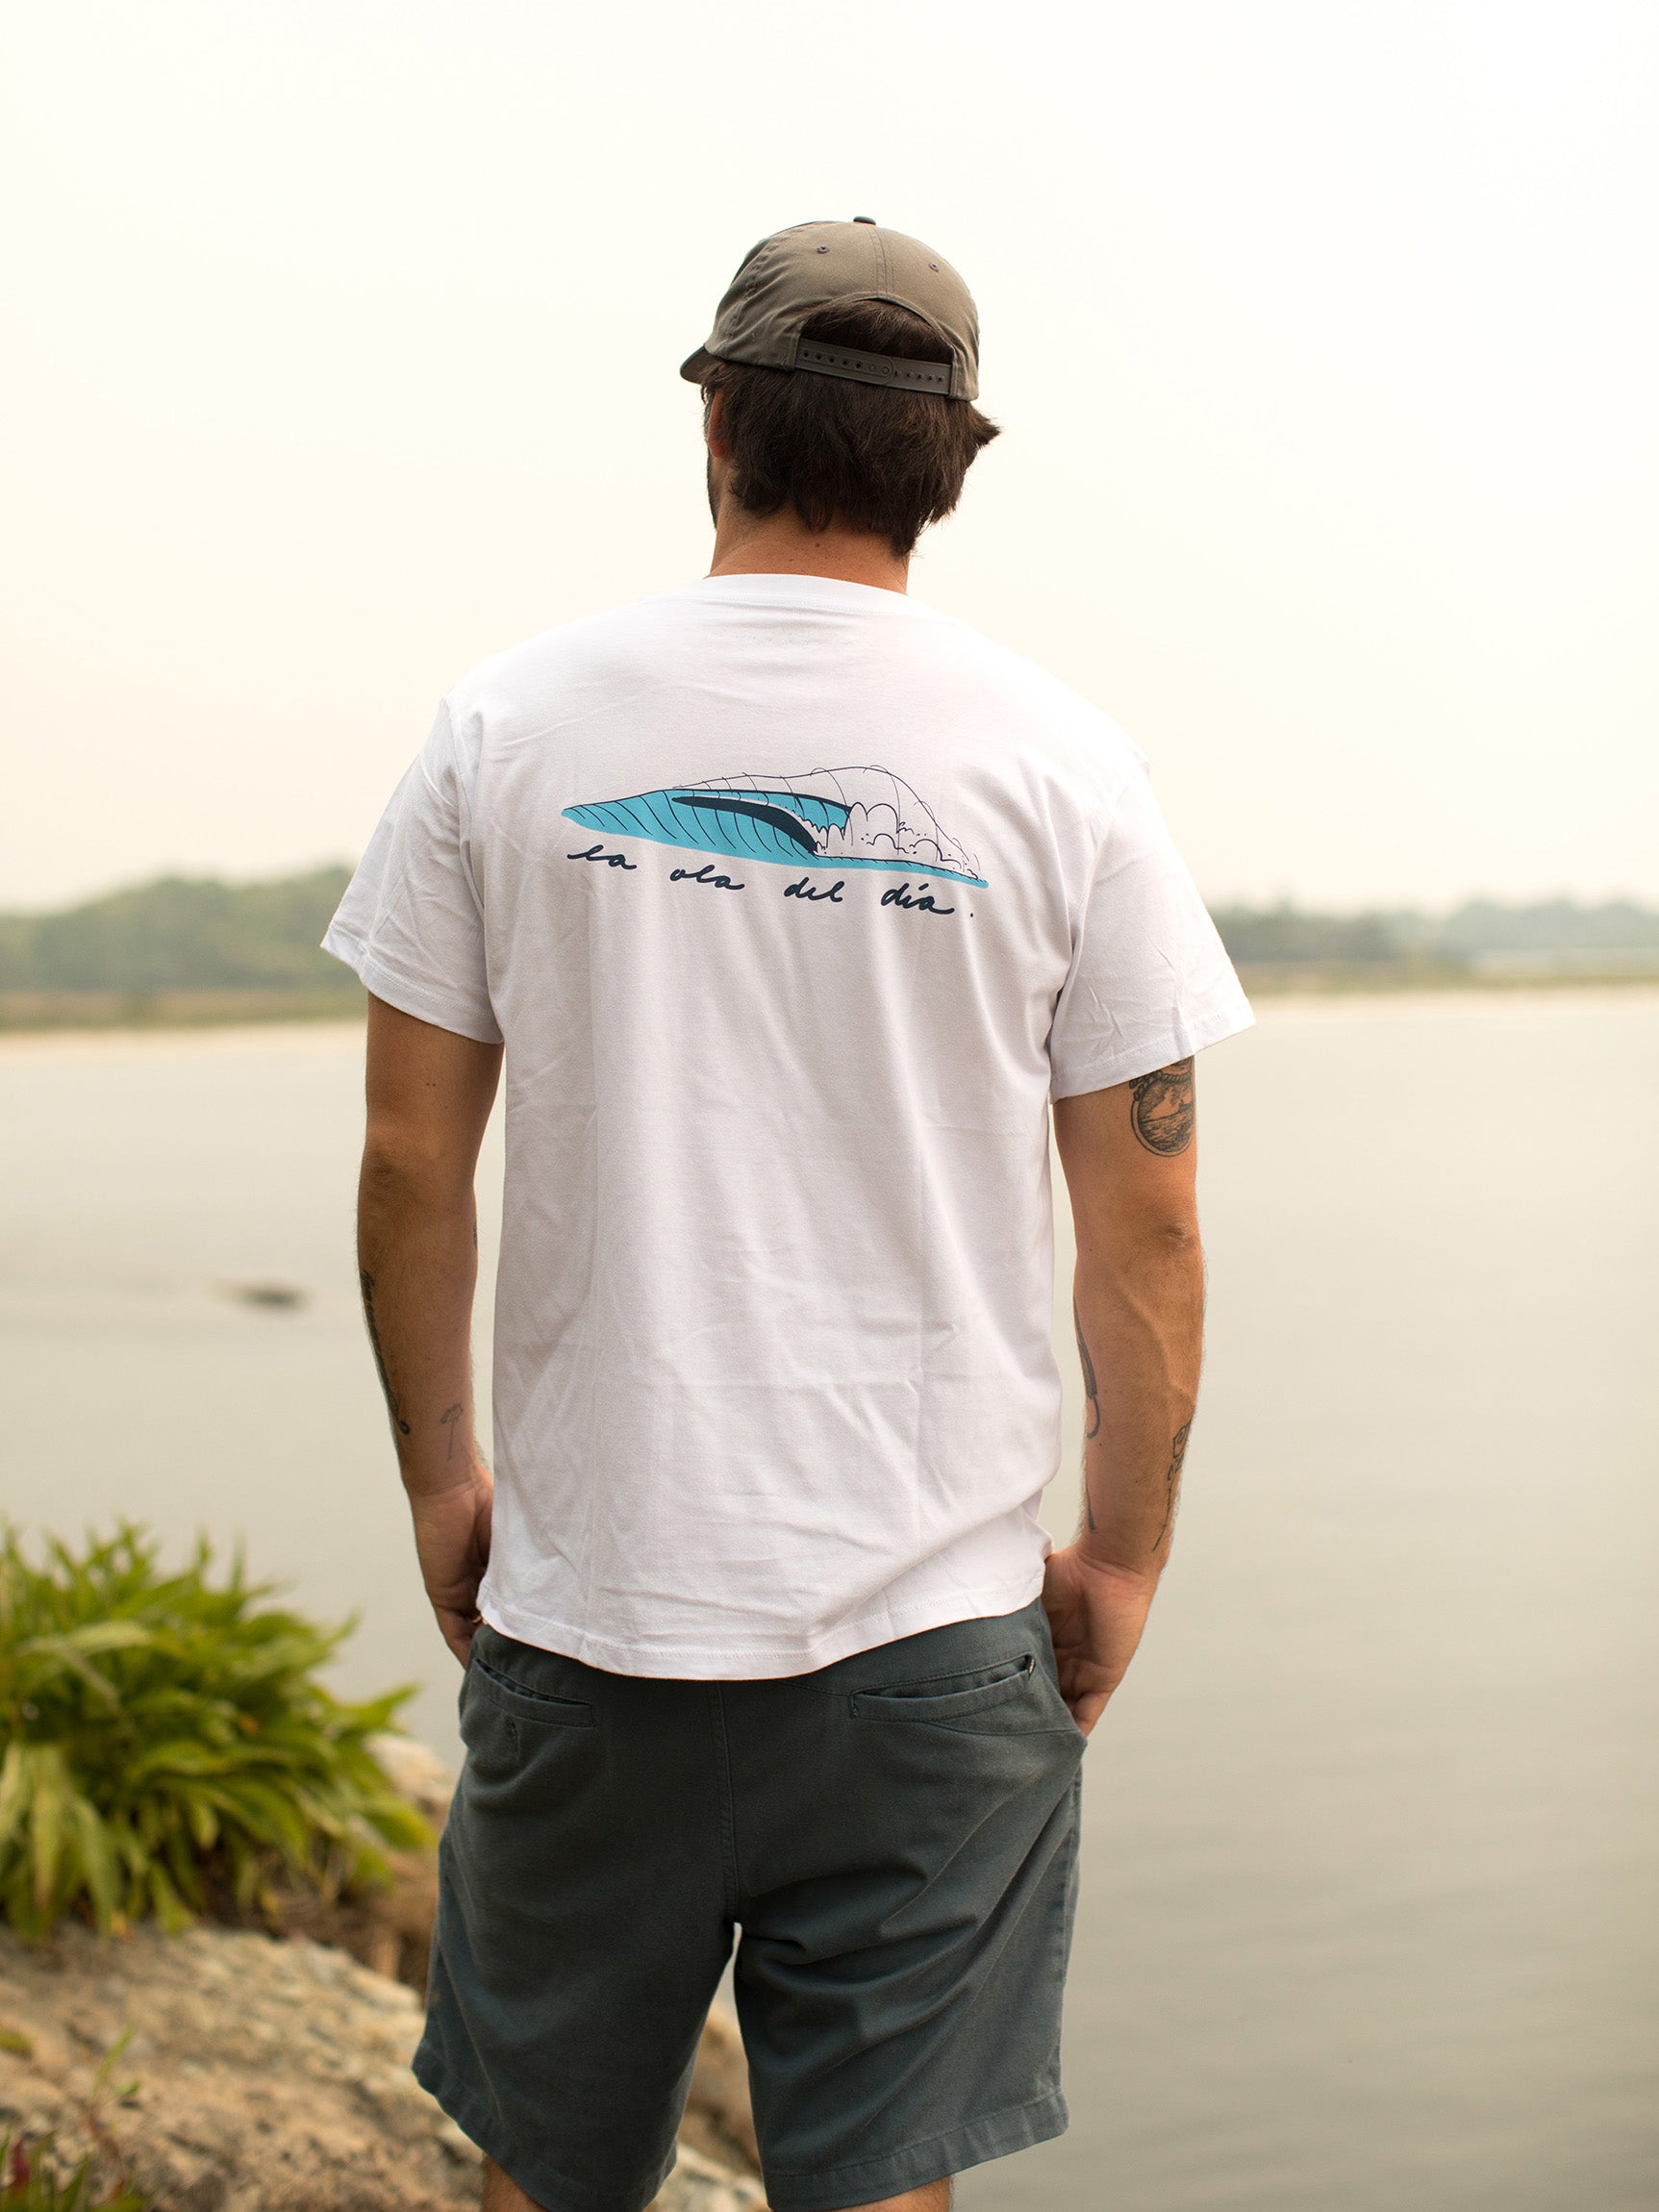 Man with his back towards the camera, wearing a white t-shirt with a blue wave graphic and text 'la ola del día' on the back, standing by the water.